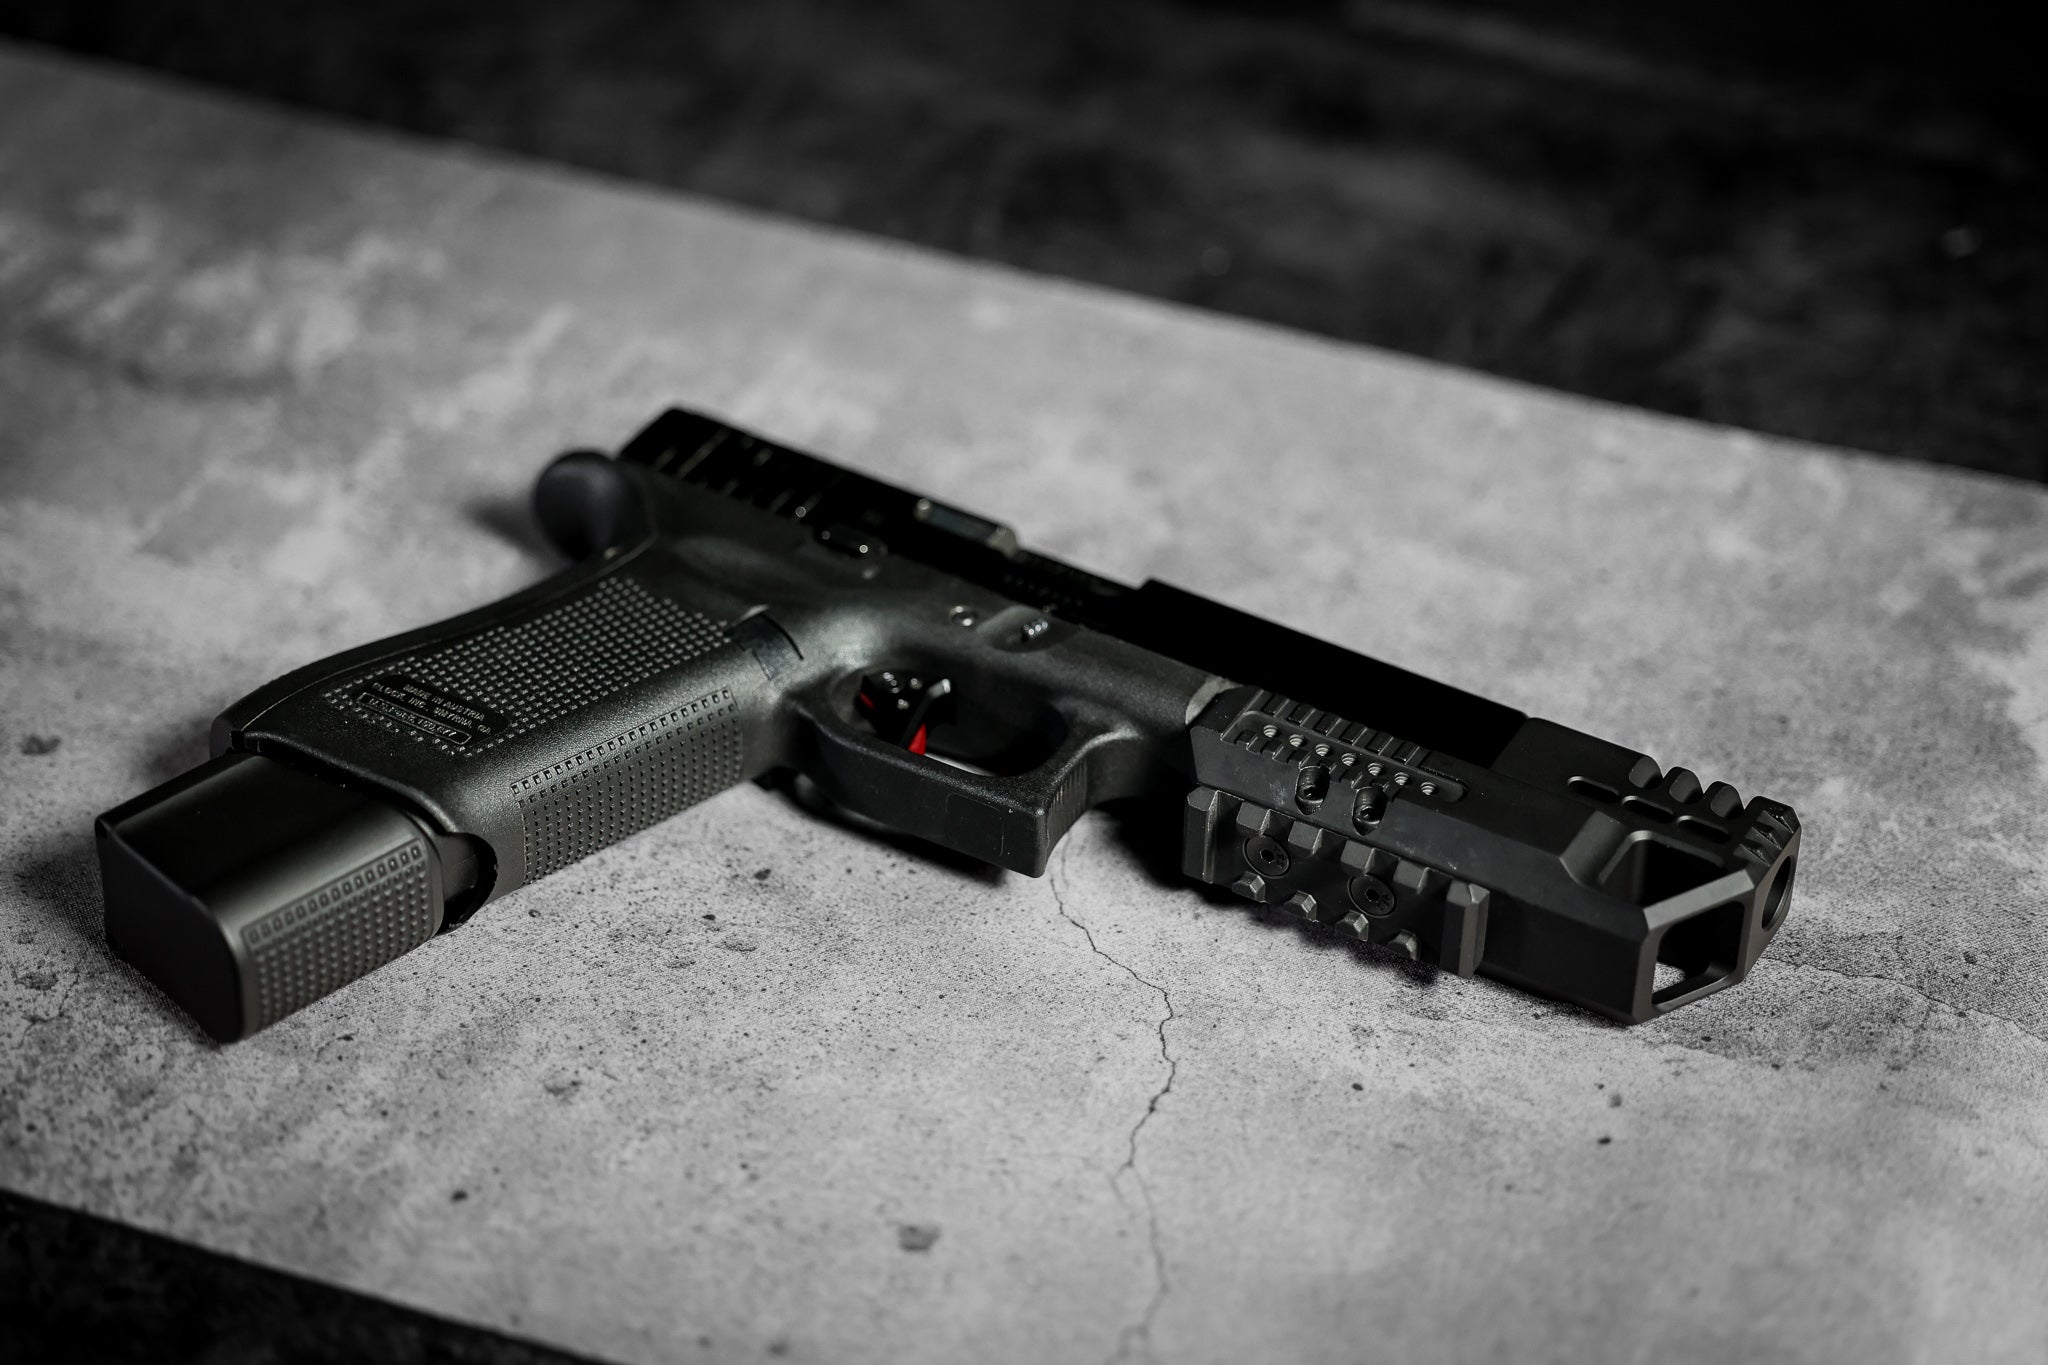 Glock 17 Compensator – Wasatch Arms